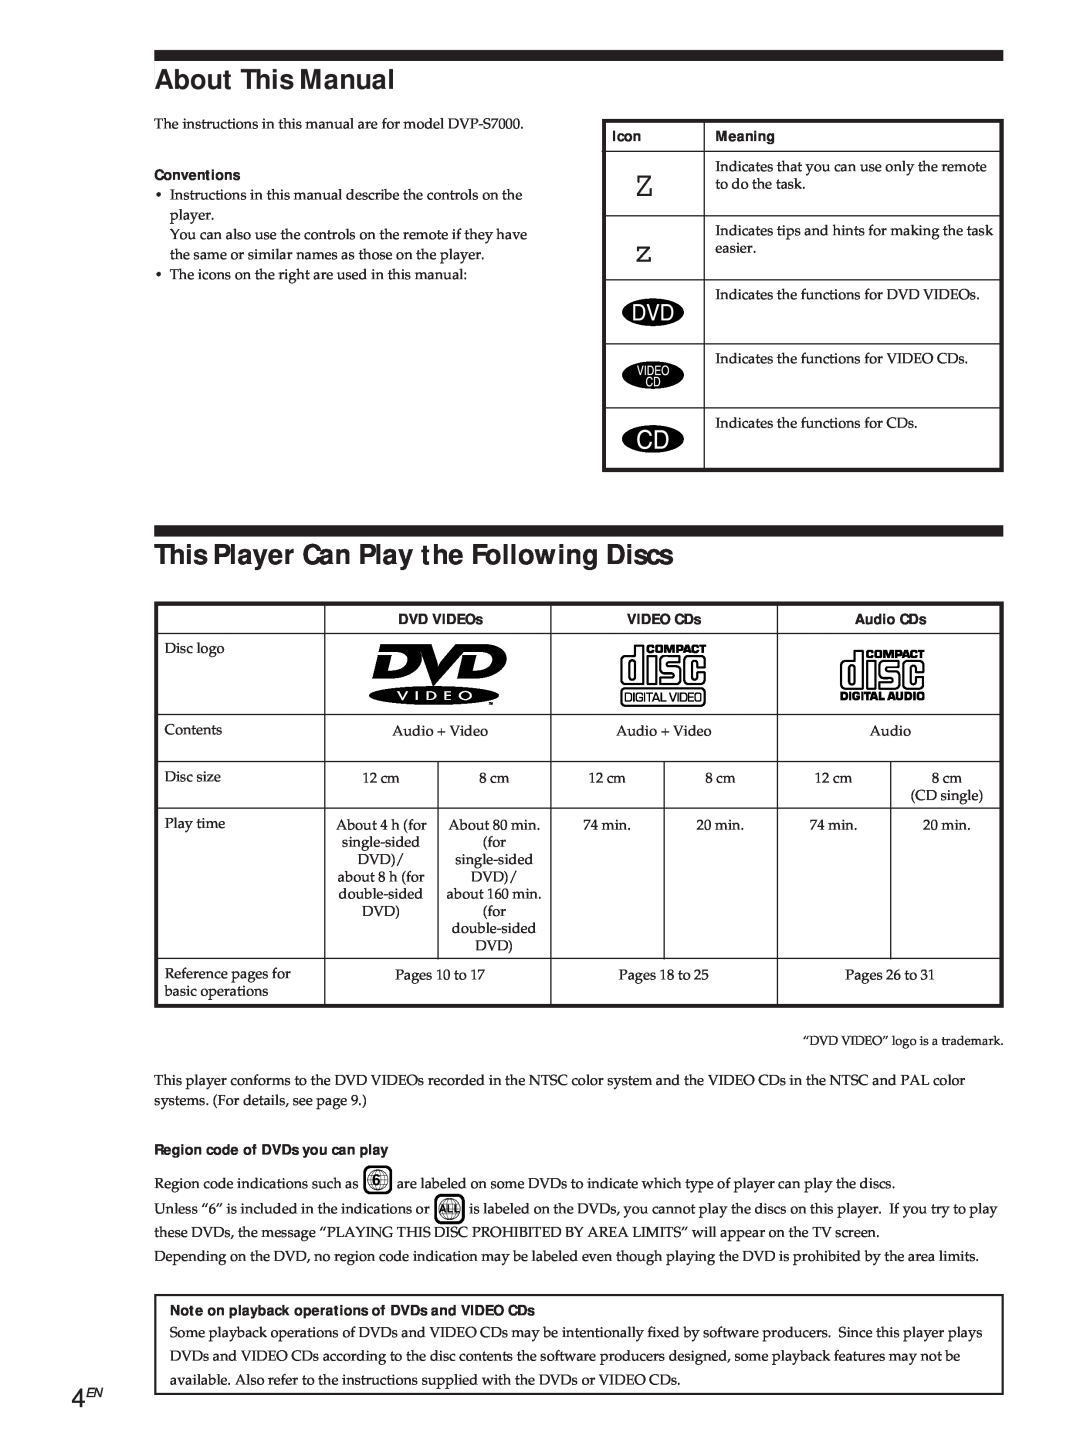 Sony DVP3980 About This Manual, This Player Can Play the Following Discs, Getting Started, Conventions, Icon, Meaning 